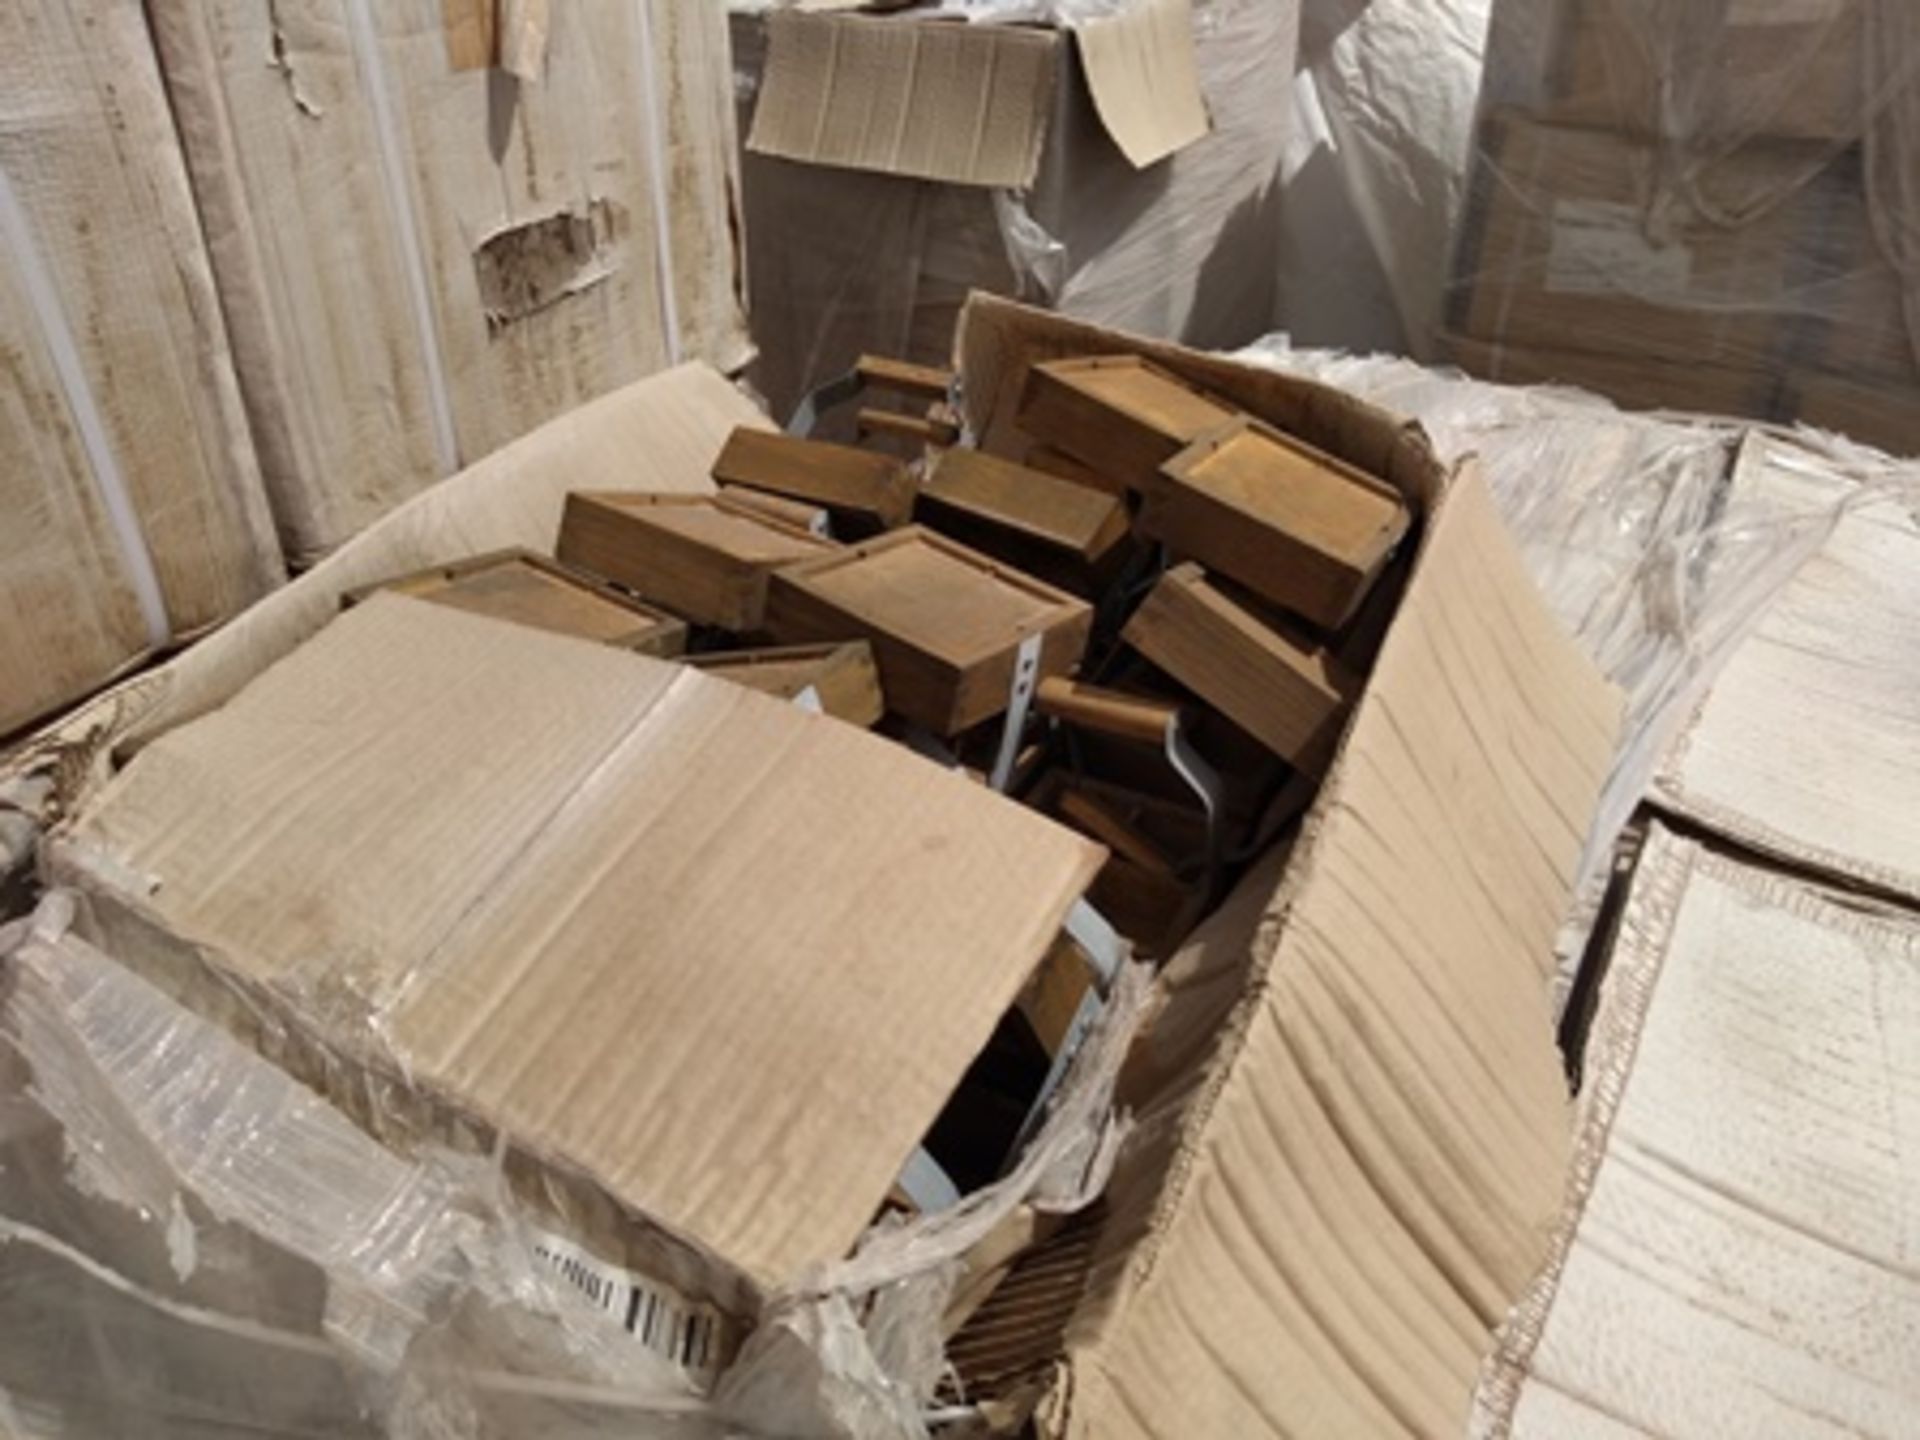 16 pallets containing: 500 boxes of finished product (egraved and shaped esteatita stones). - Image 17 of 22